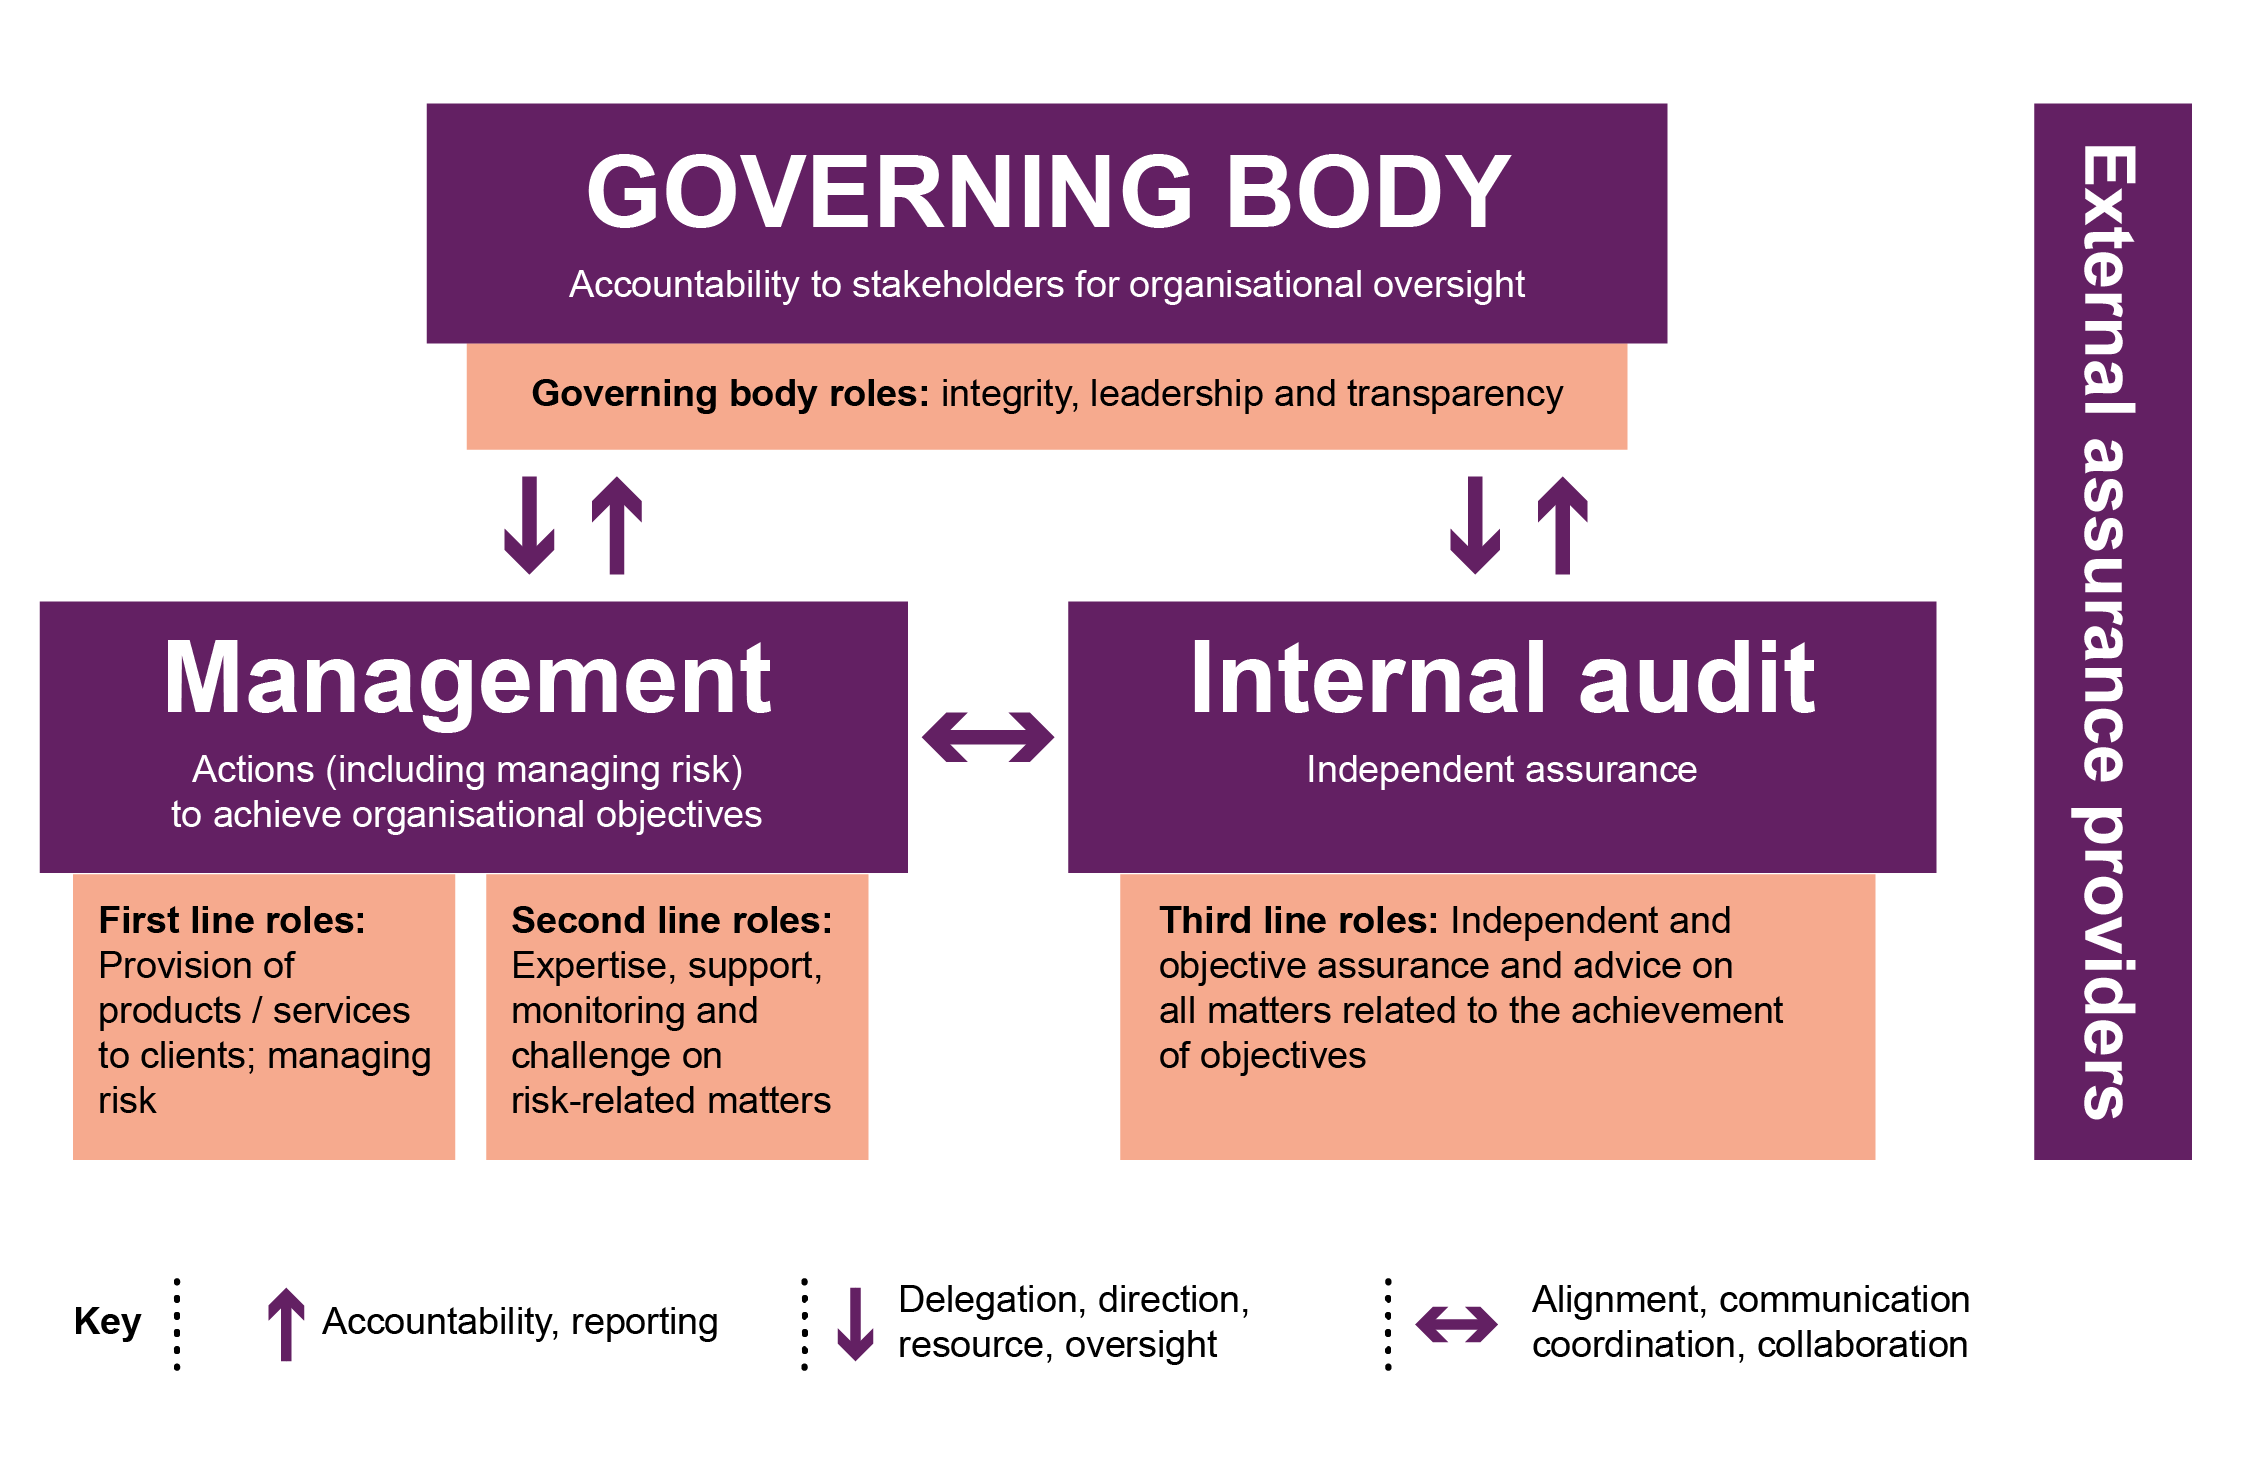 A model showing that the Governing Body is responsible for delegating, overseeing and directing resources to both the Management and the Internal Audit which, in turn, reports to the Management Body.  The Management provides the first line (senior management) and the second line (compliance management). It coordinates and collaborates with the Internal Audit which provides the third line (independent assurance & advice) 